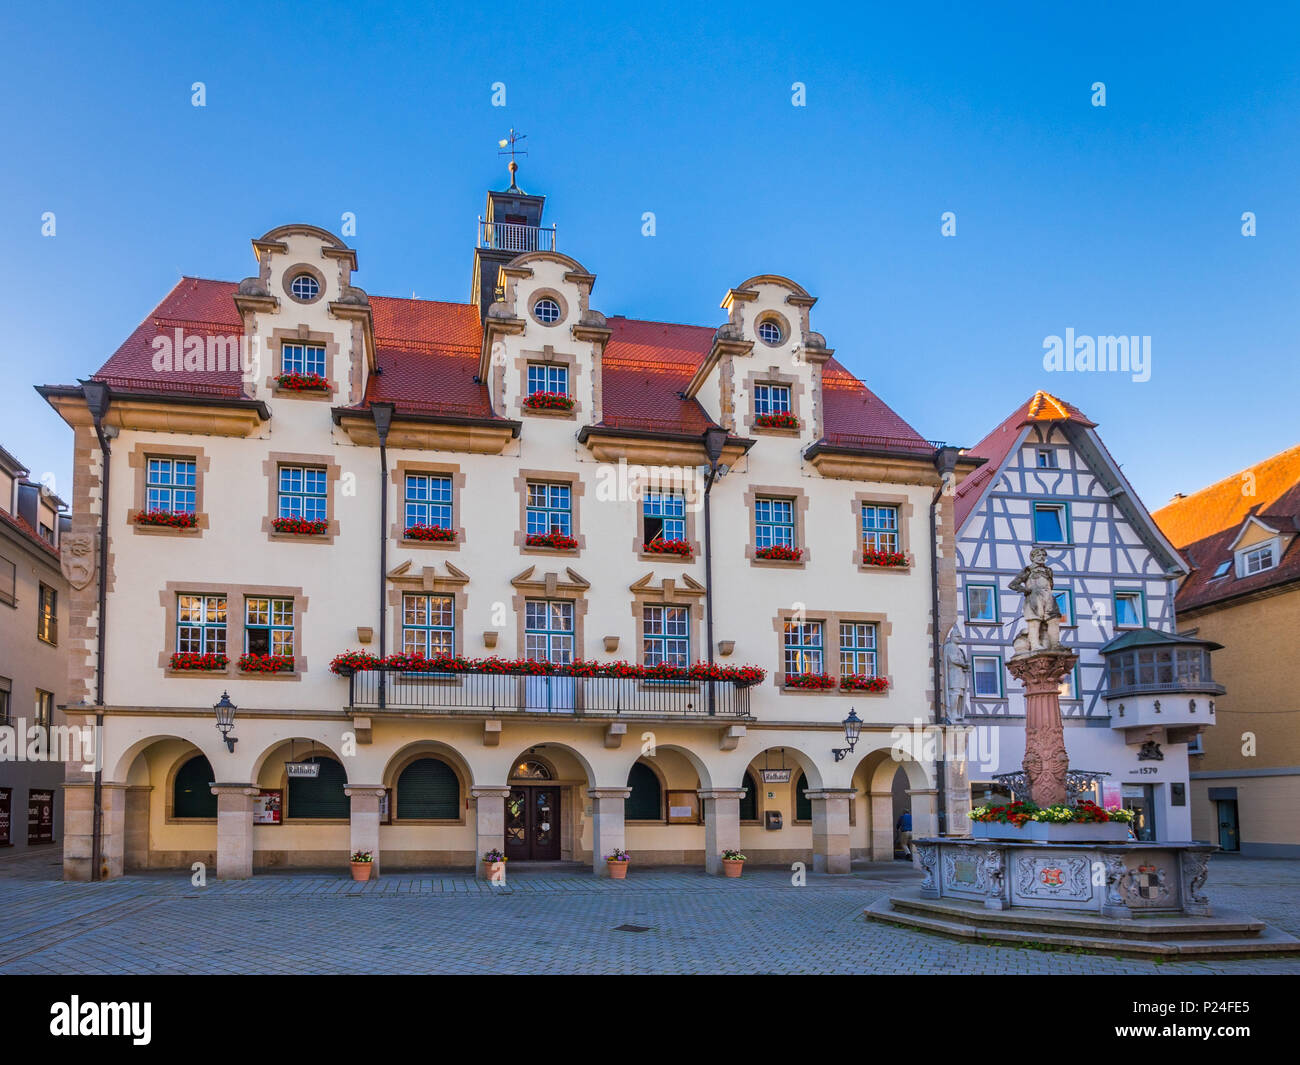 City hall and market fountain, Old Town, Sigmaringen, Baden-Wurttemberg, Germany, Europe Stock Photo